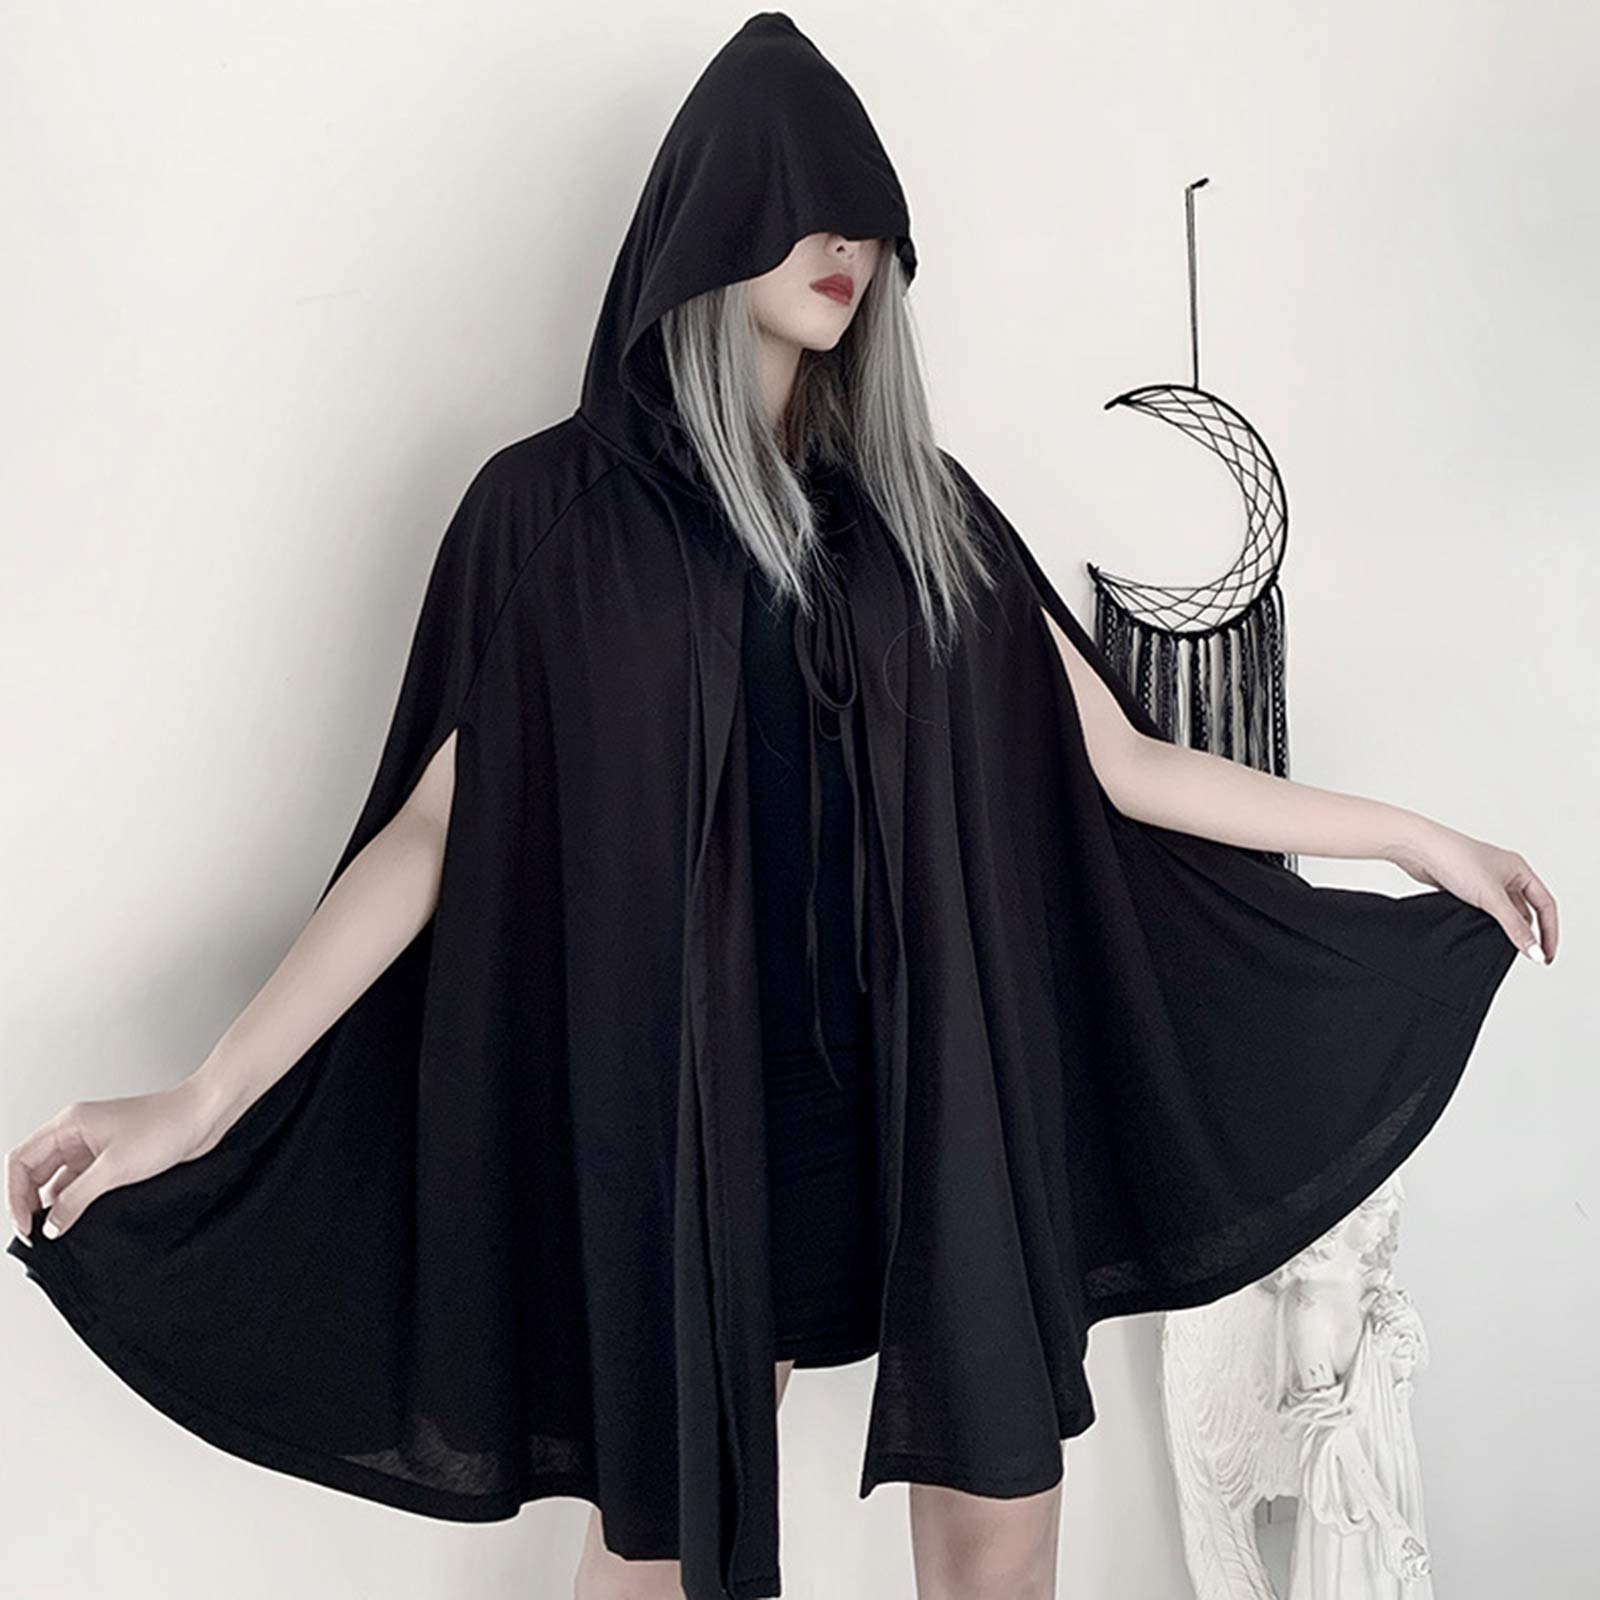  EASEDAILY Lace Hooded Cloak Black Long Cape Gothic